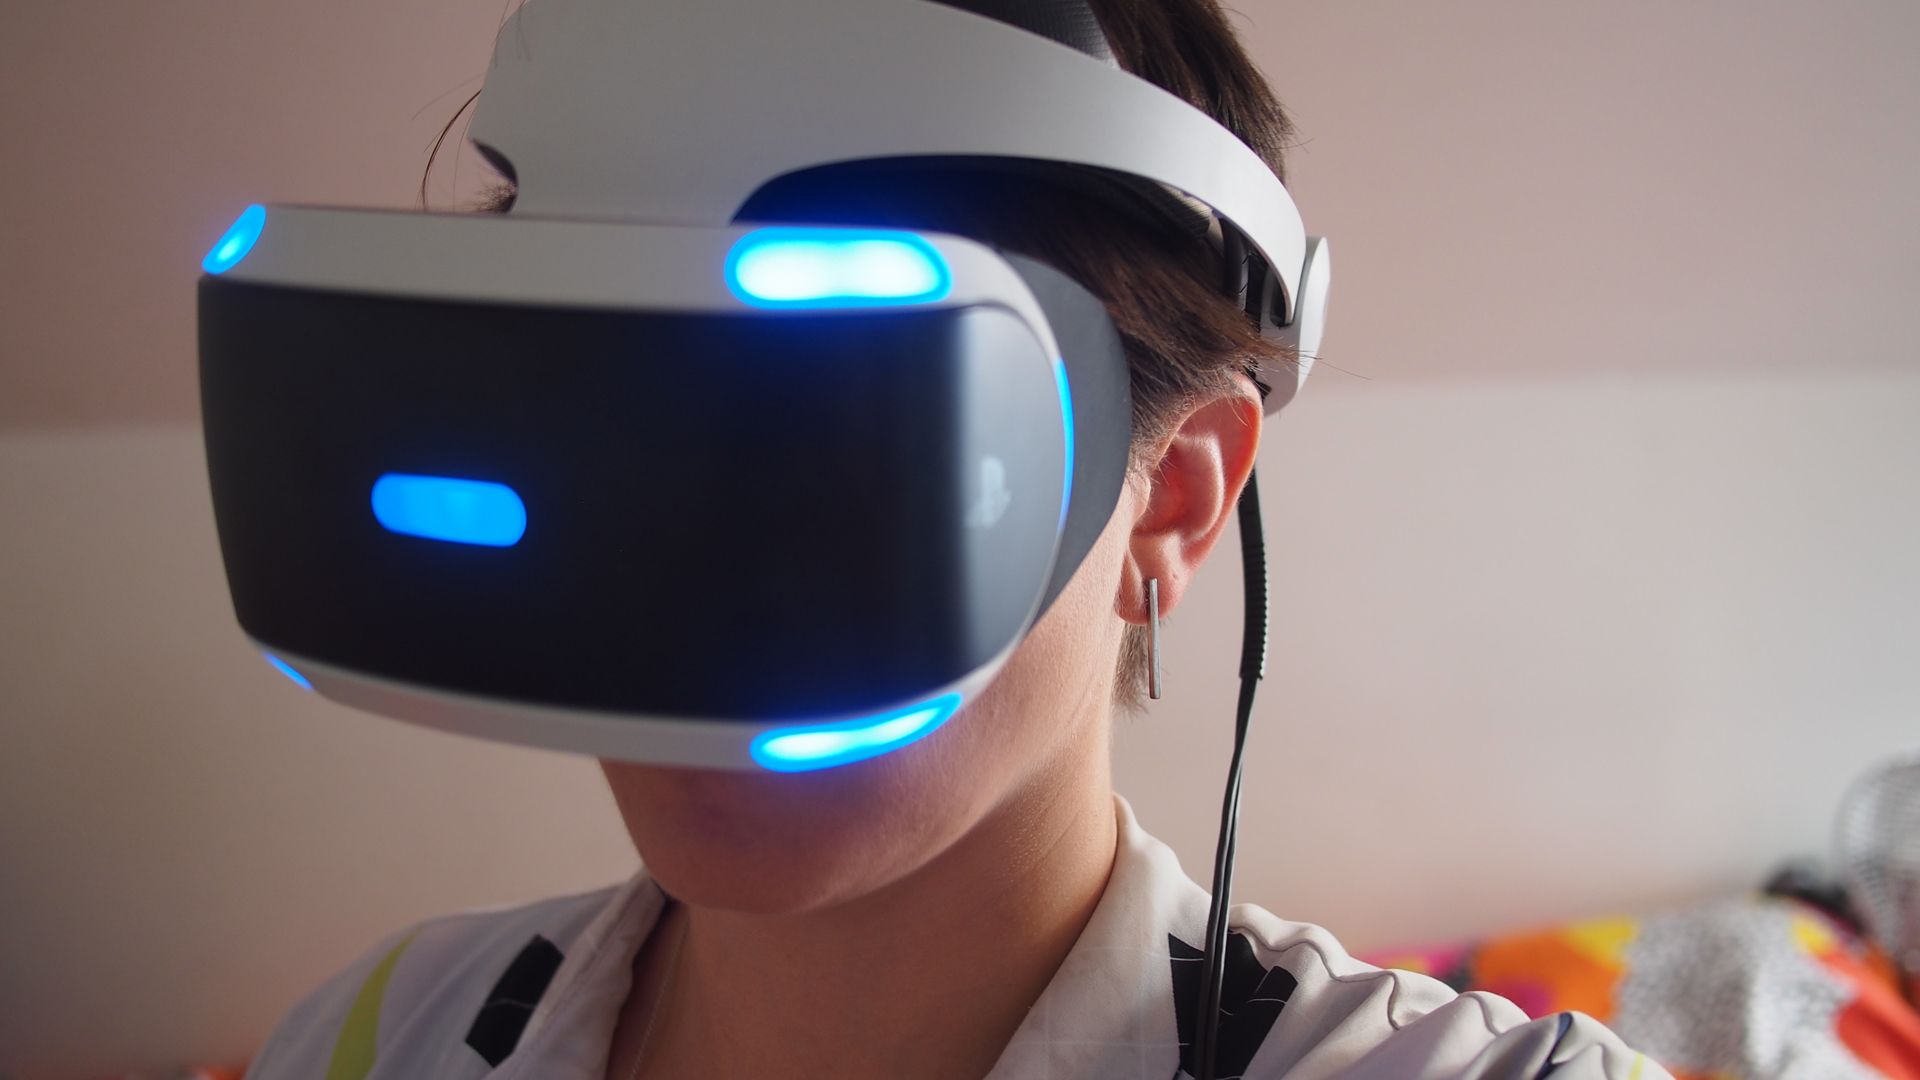 How To Watch Porn On Psvr